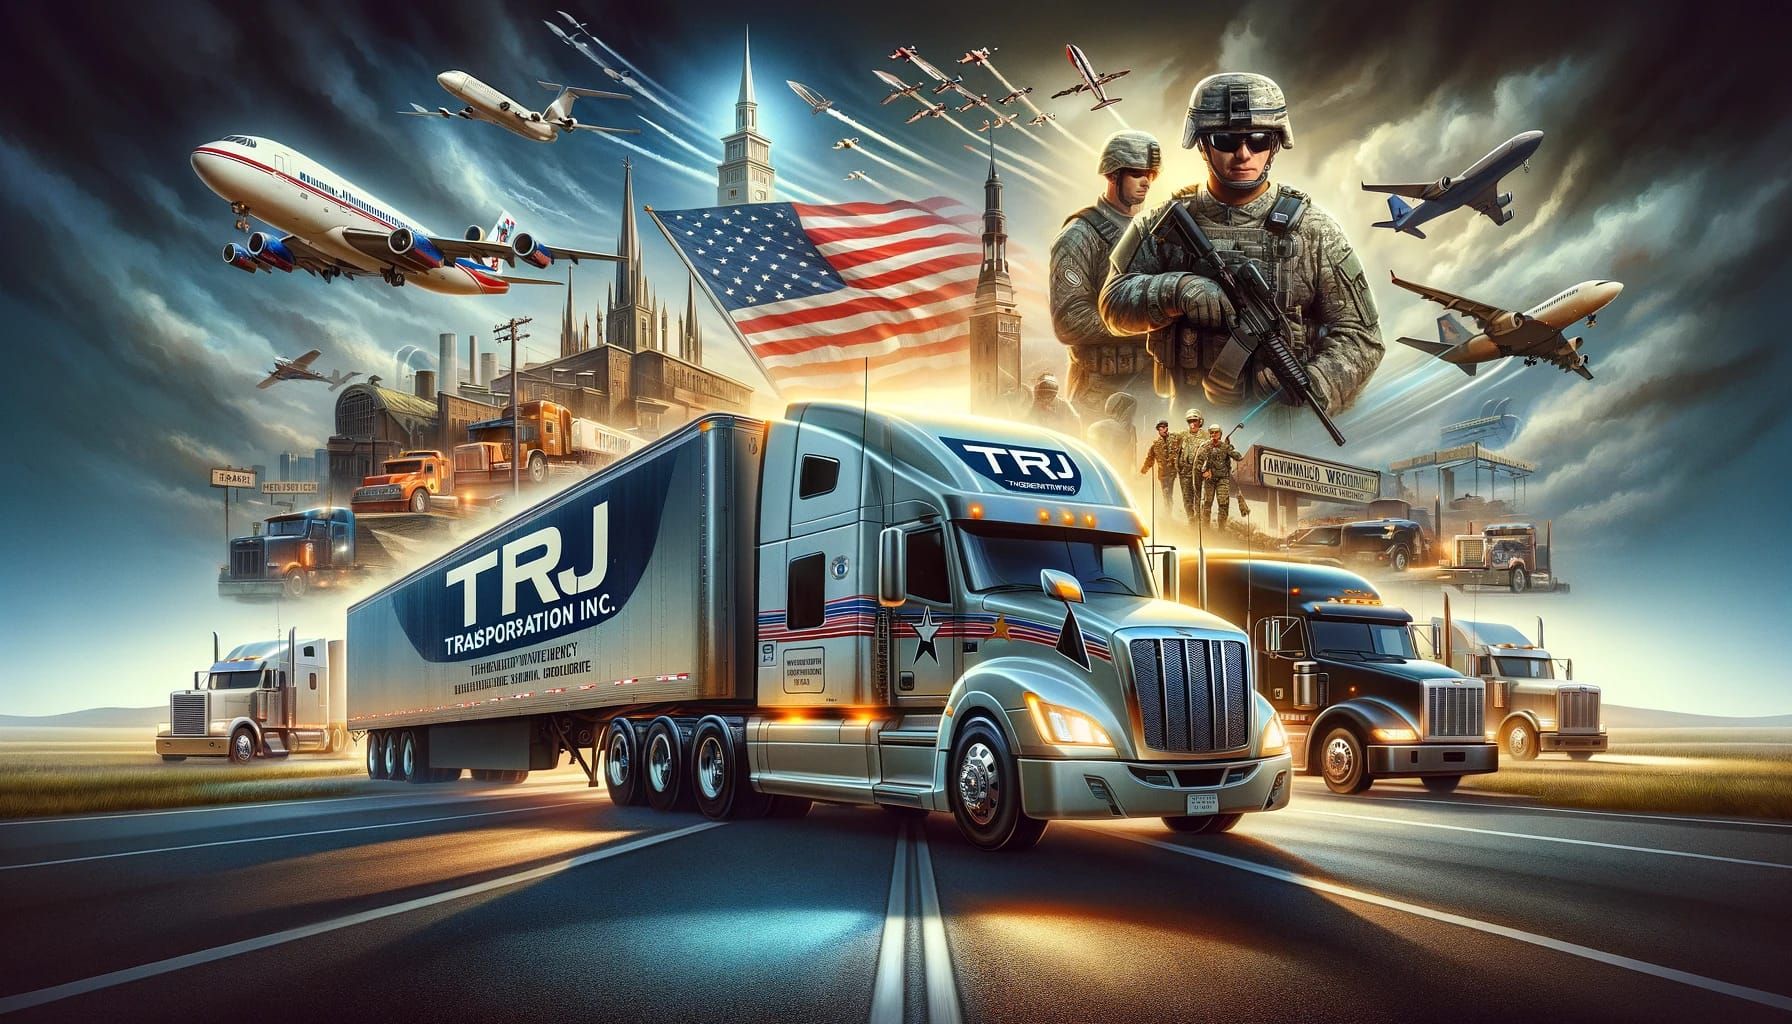 A truck is driving down a highway with planes and soldiers in the background.